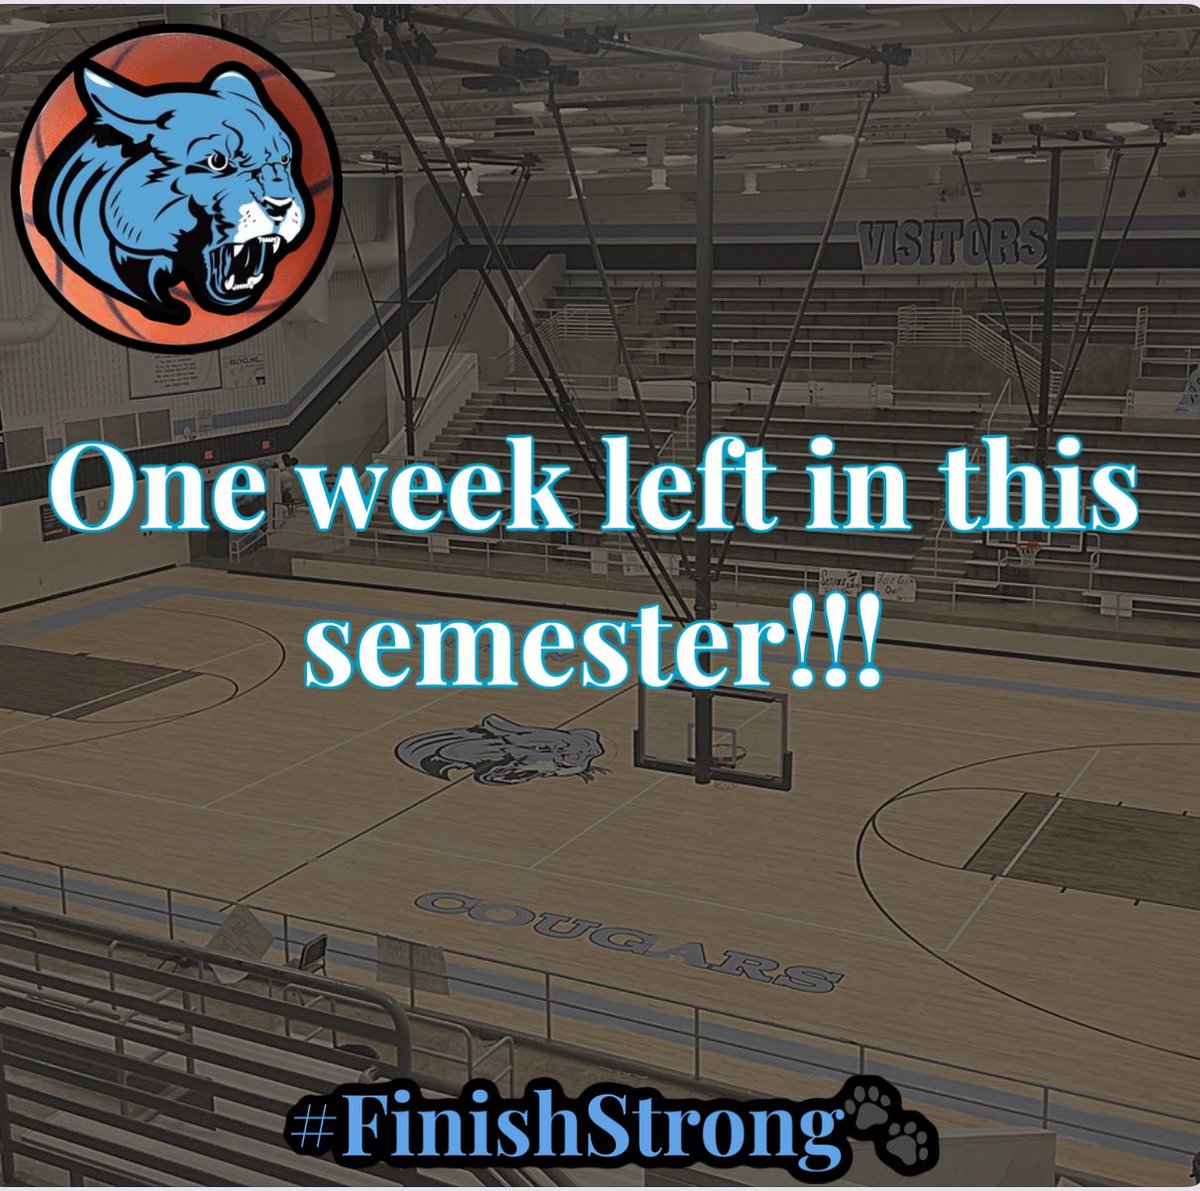 Good evening Coug Family, We have one week left in this semester. Please check your student athletes grades. Let’s Finish this school year off strong!!!